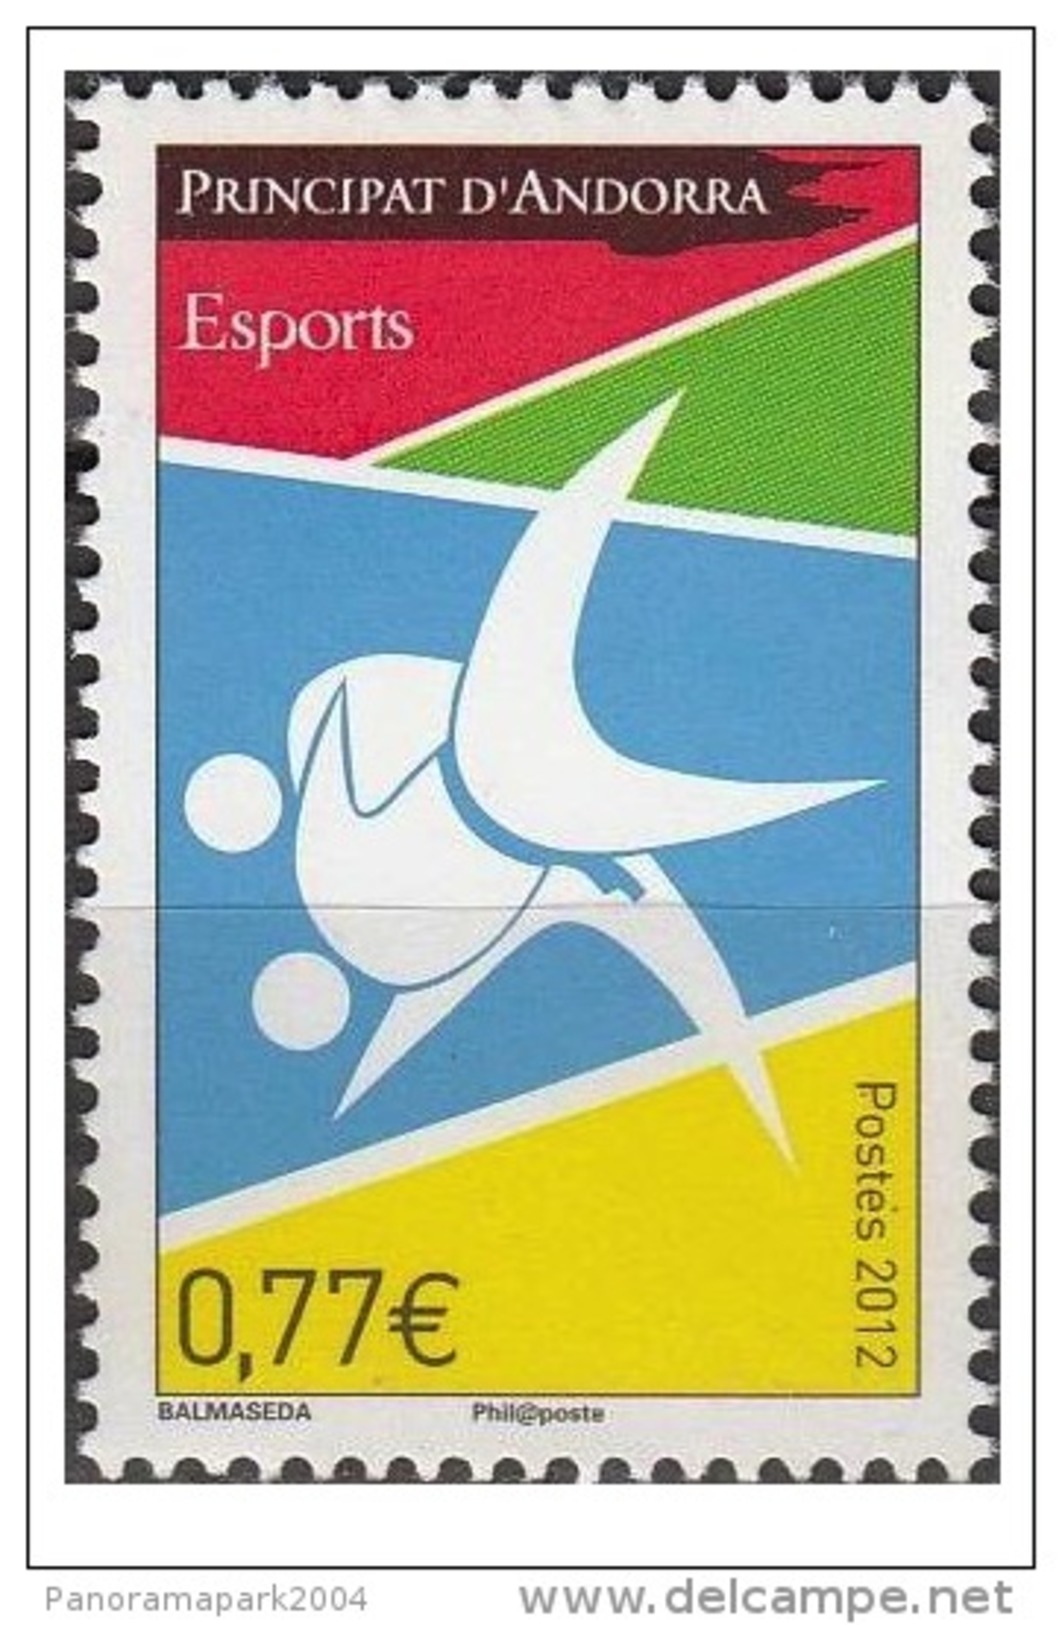 ANDORRE PRINCIPAT ANDORRA 2012 SPORT SPORTS ESPORTS JUDO JEUX OLYMPIQUES OLYMPIC GAMES LONDON OLYMPIA OLYMPISCHE SPIELE - Unused Stamps